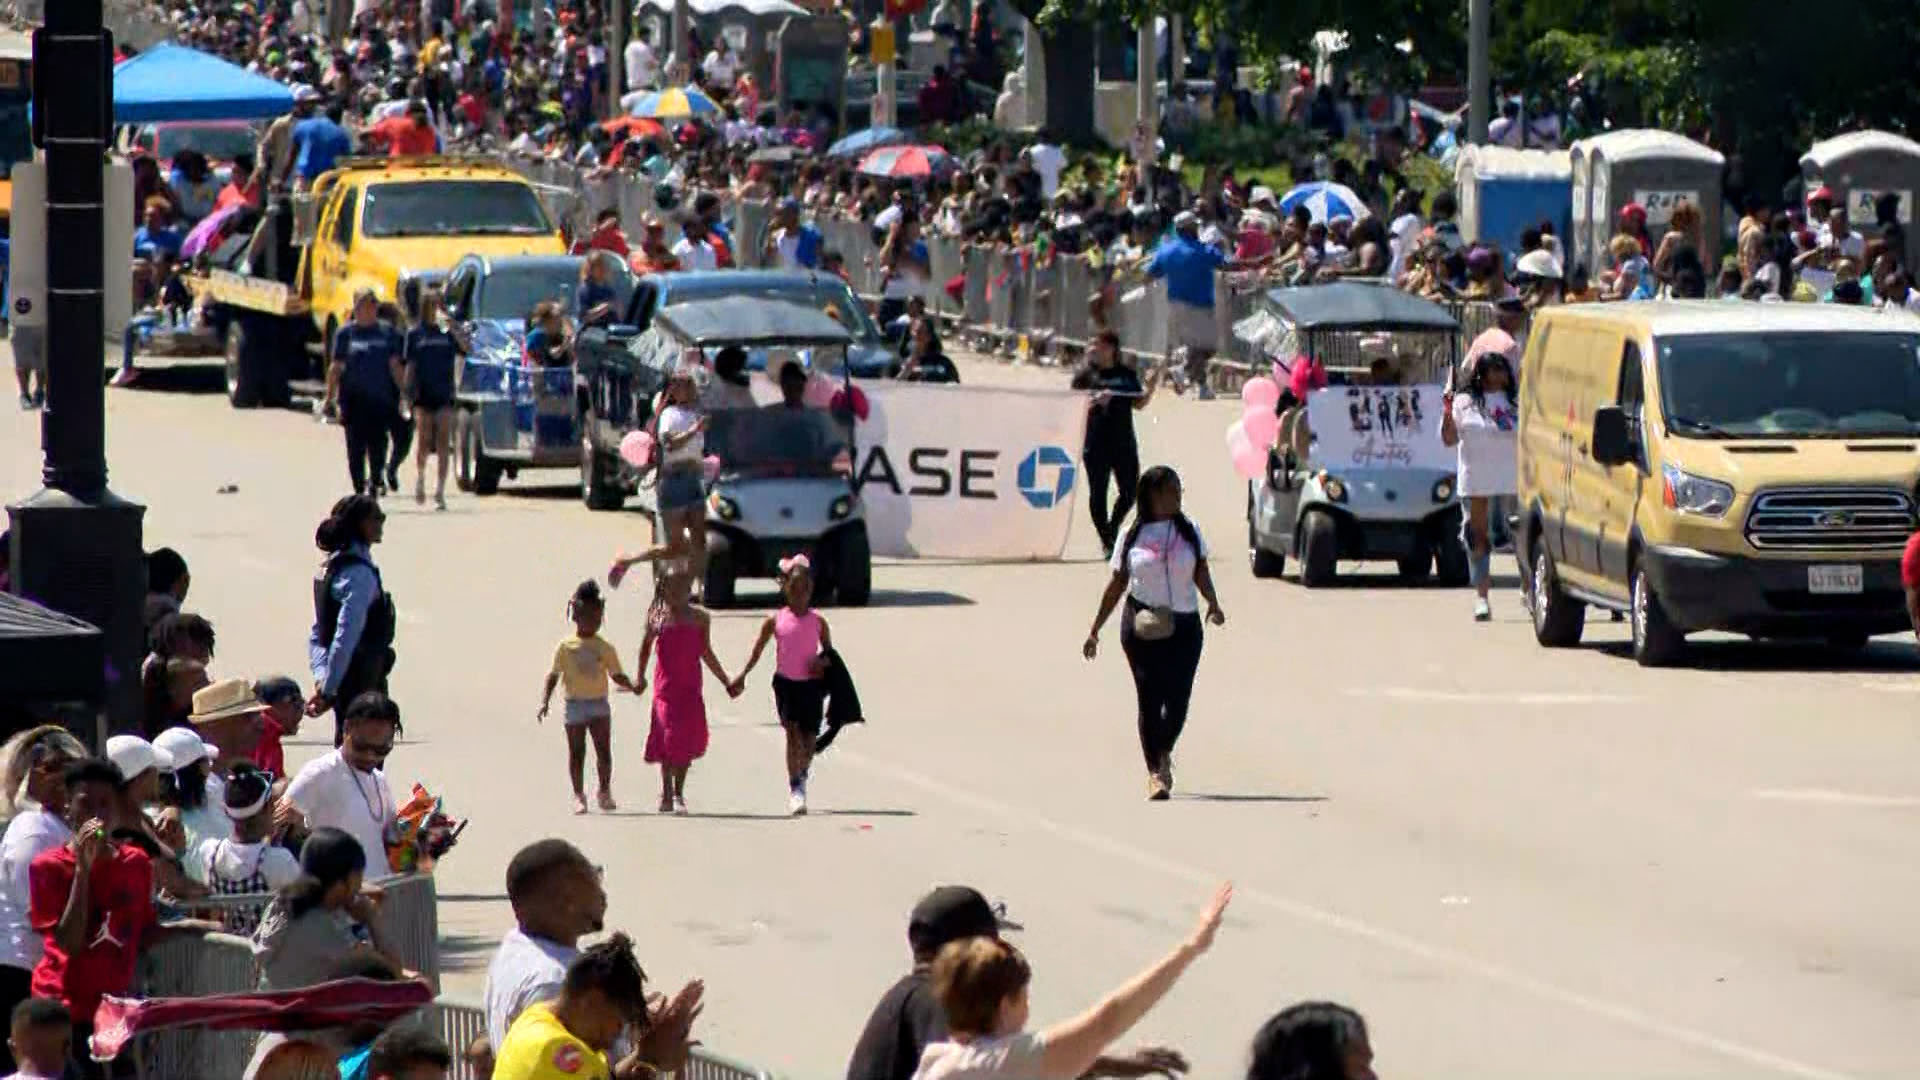 The Annie Malone May Day Parade is the second-largest African-American parade in the country with over 3,500 participants and 30,000 spectators.